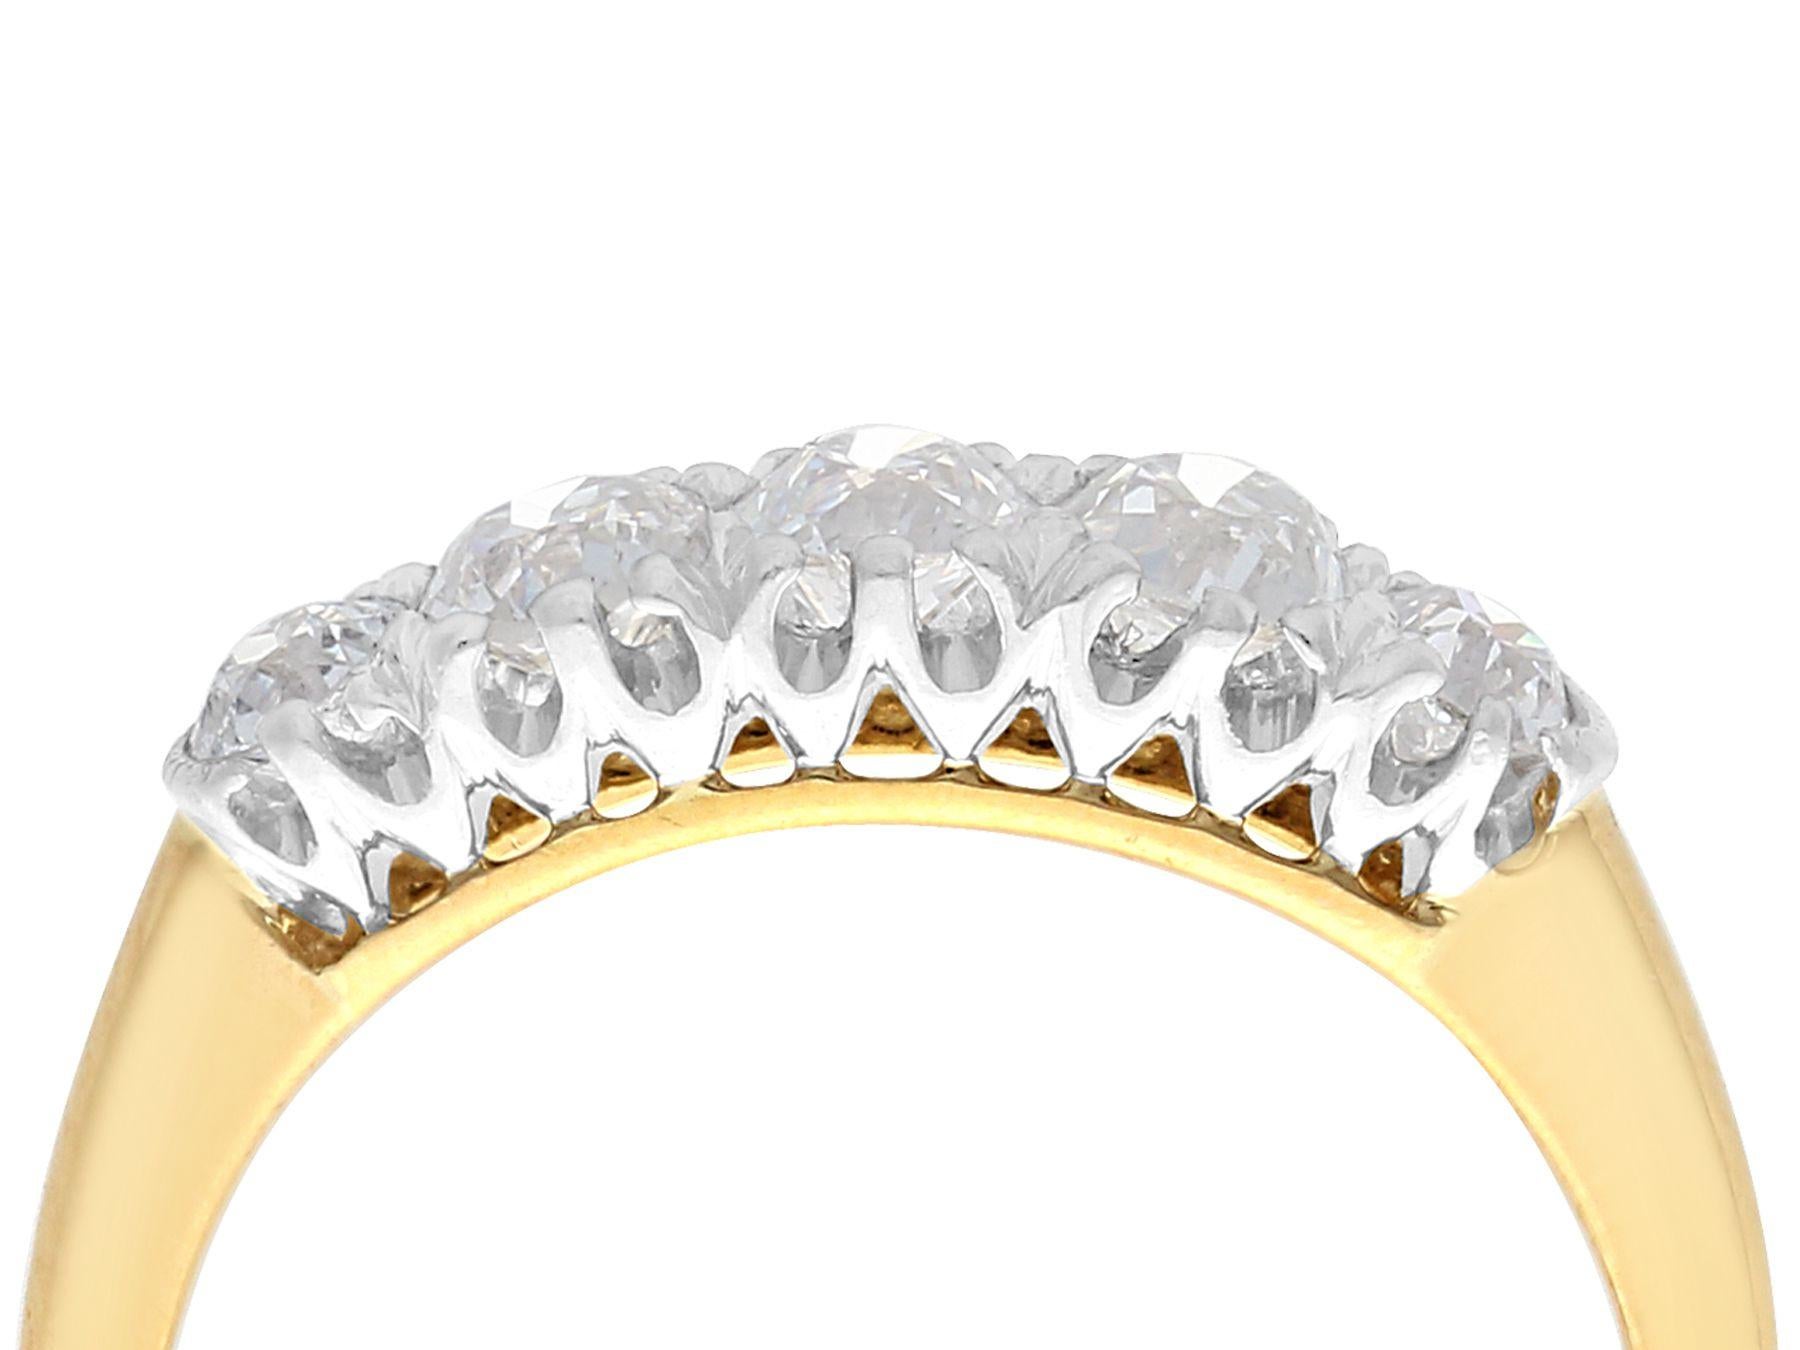 An impressive 0.90 carat diamond and 18 karat yellow gold, platinum set five stone dress ring; part of our diverse antique jewelry and estate jewelry collections

This fine and impressive diamond ring has been crafted in 18k yellow gold with a